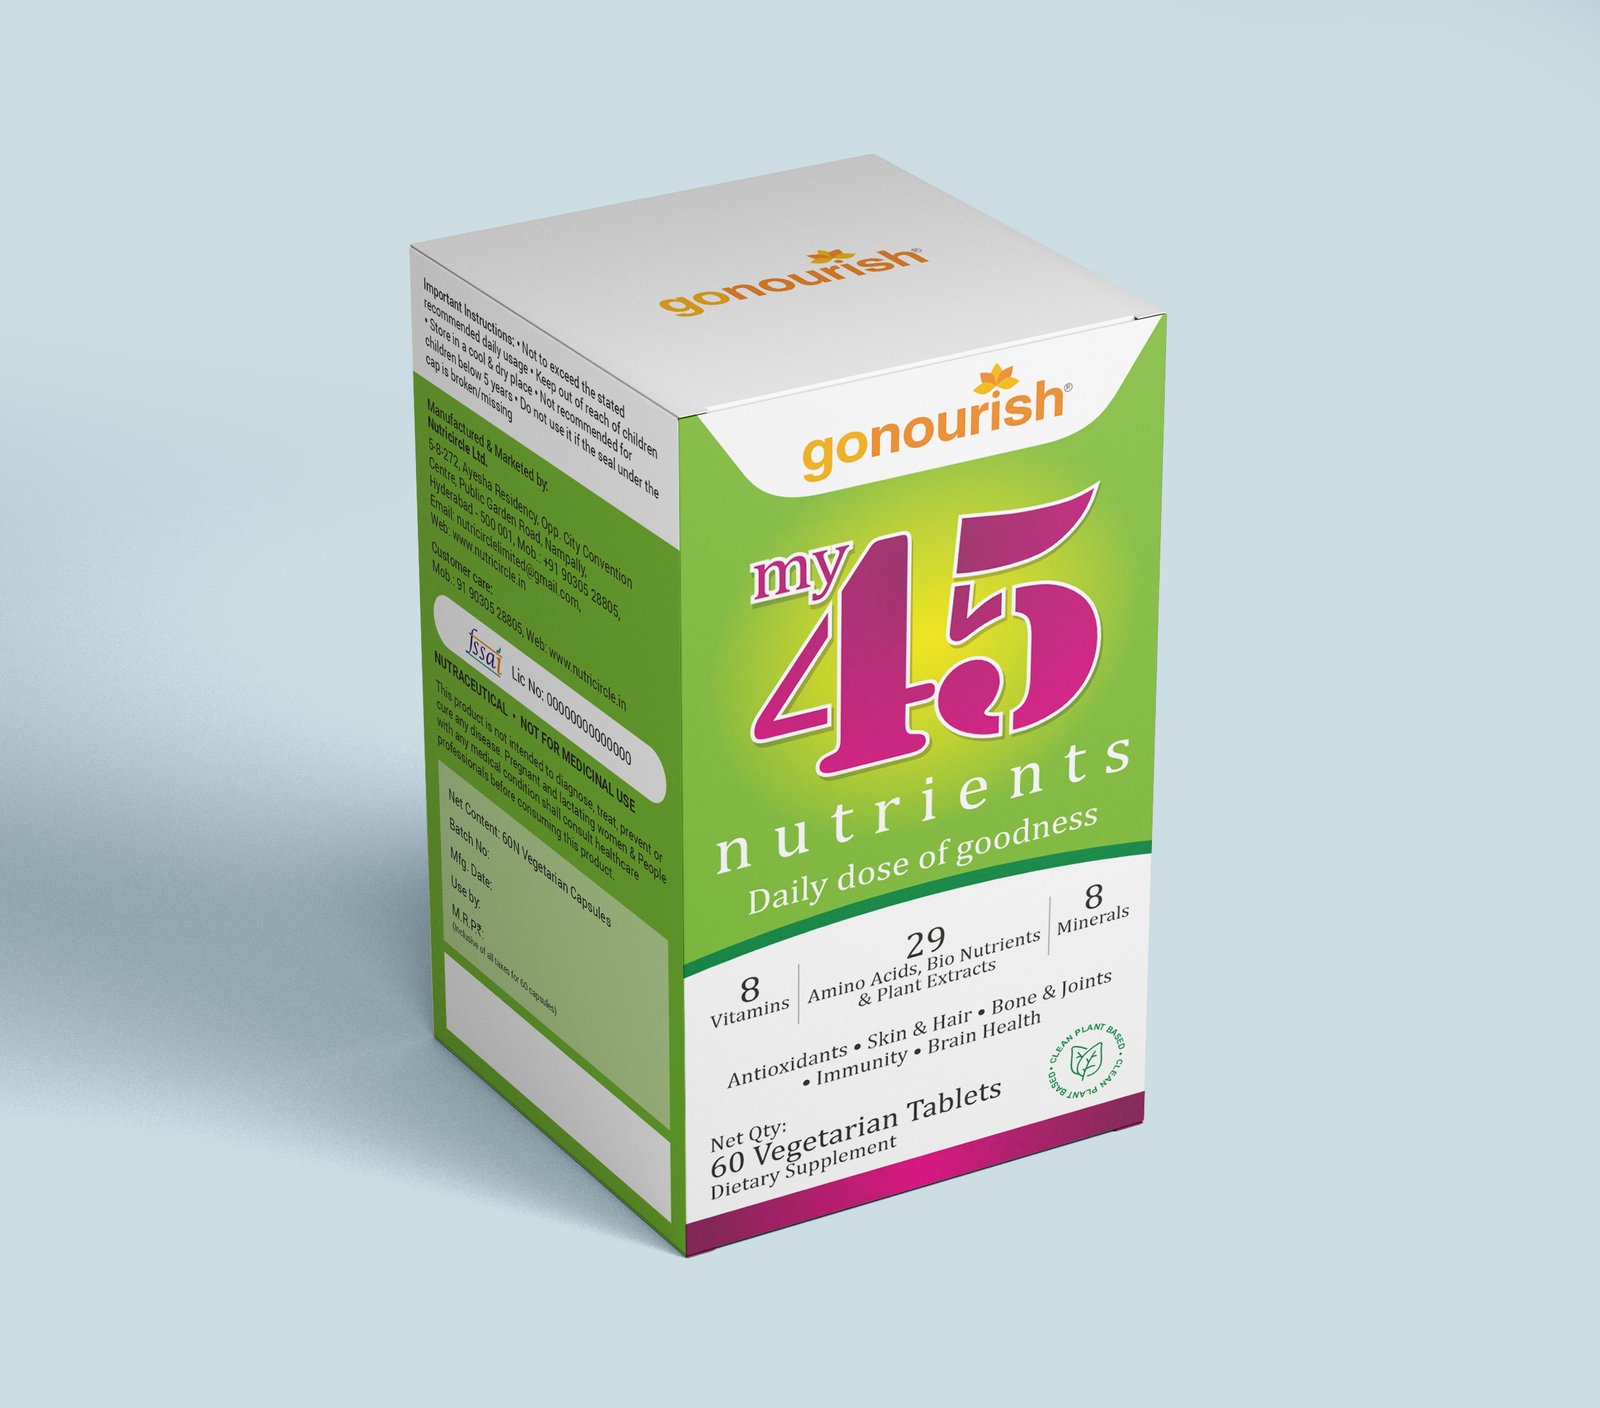 Nutricircle introduces health supplements My45NutrientsTM